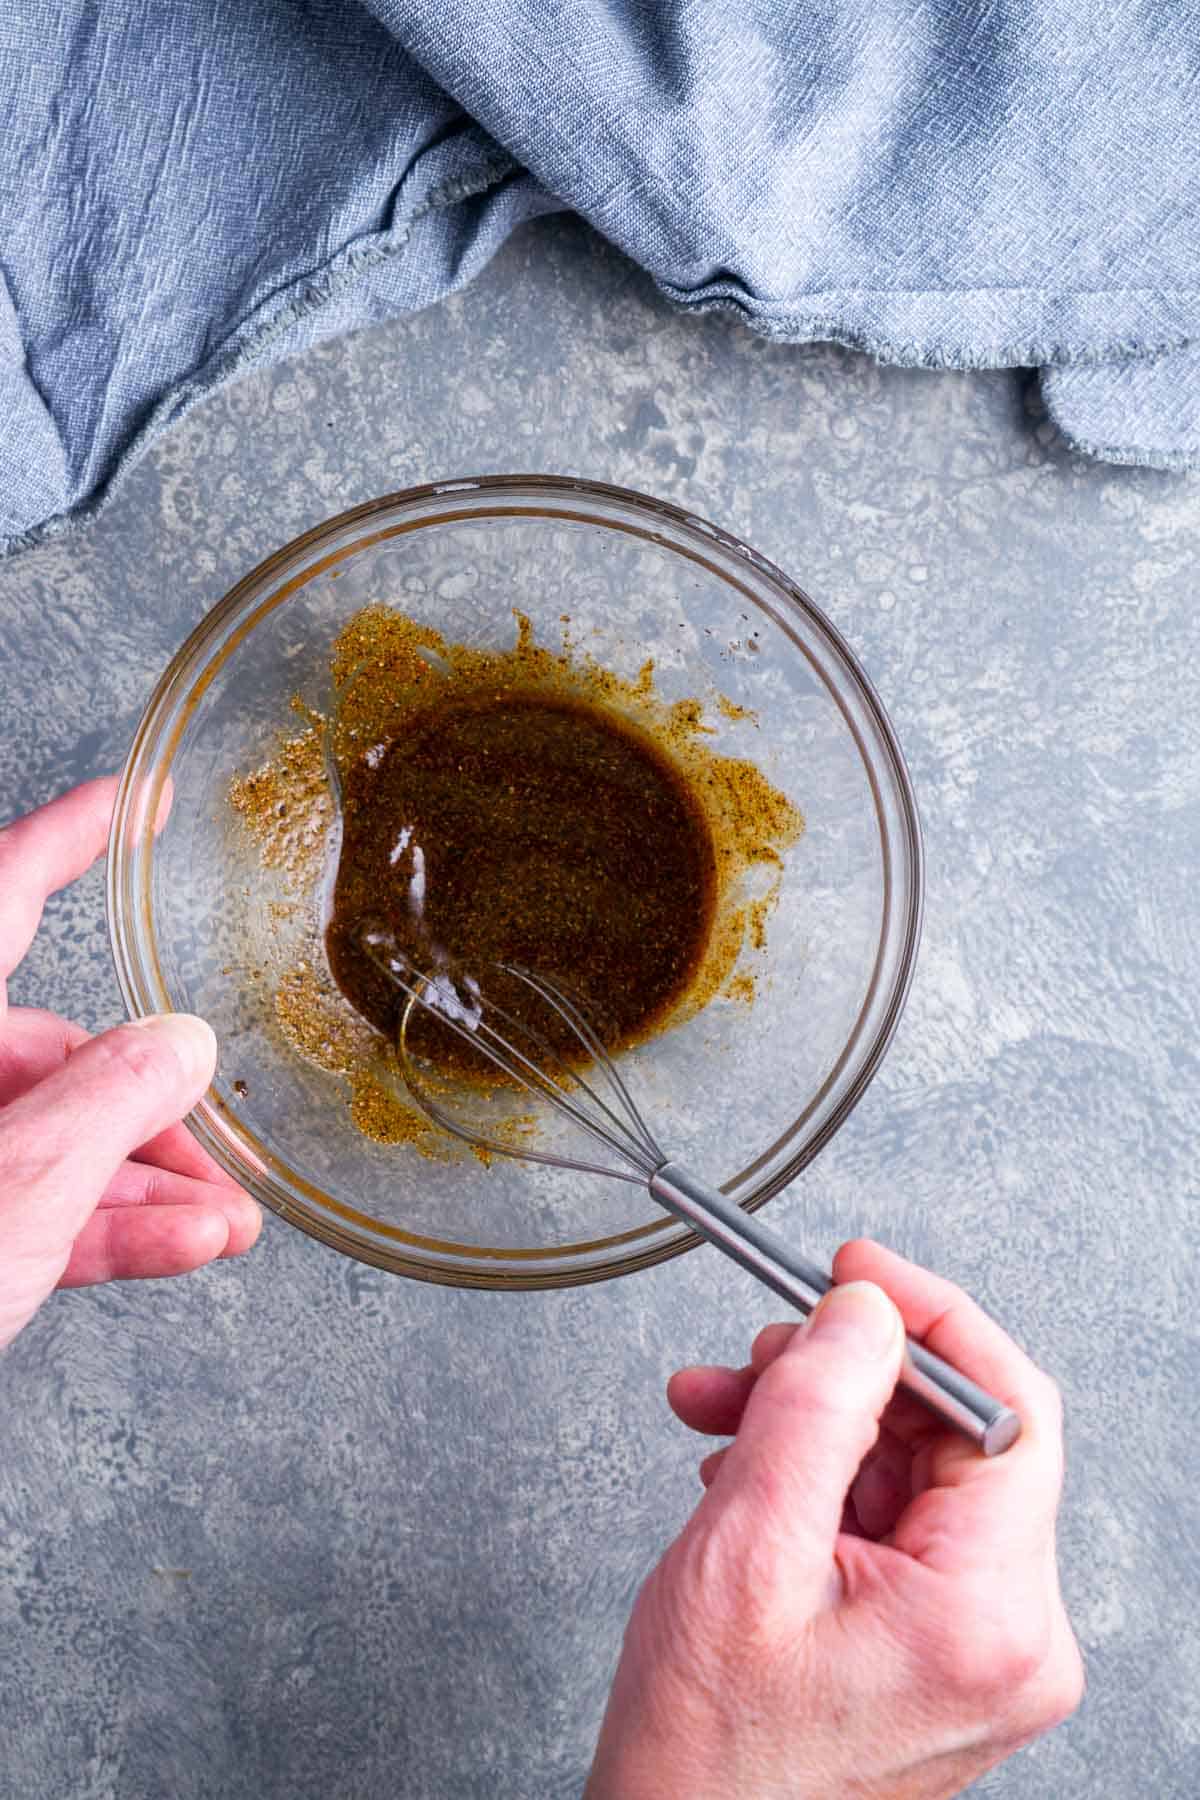 chicken wing seasoning is whisked in glass mixing bowl